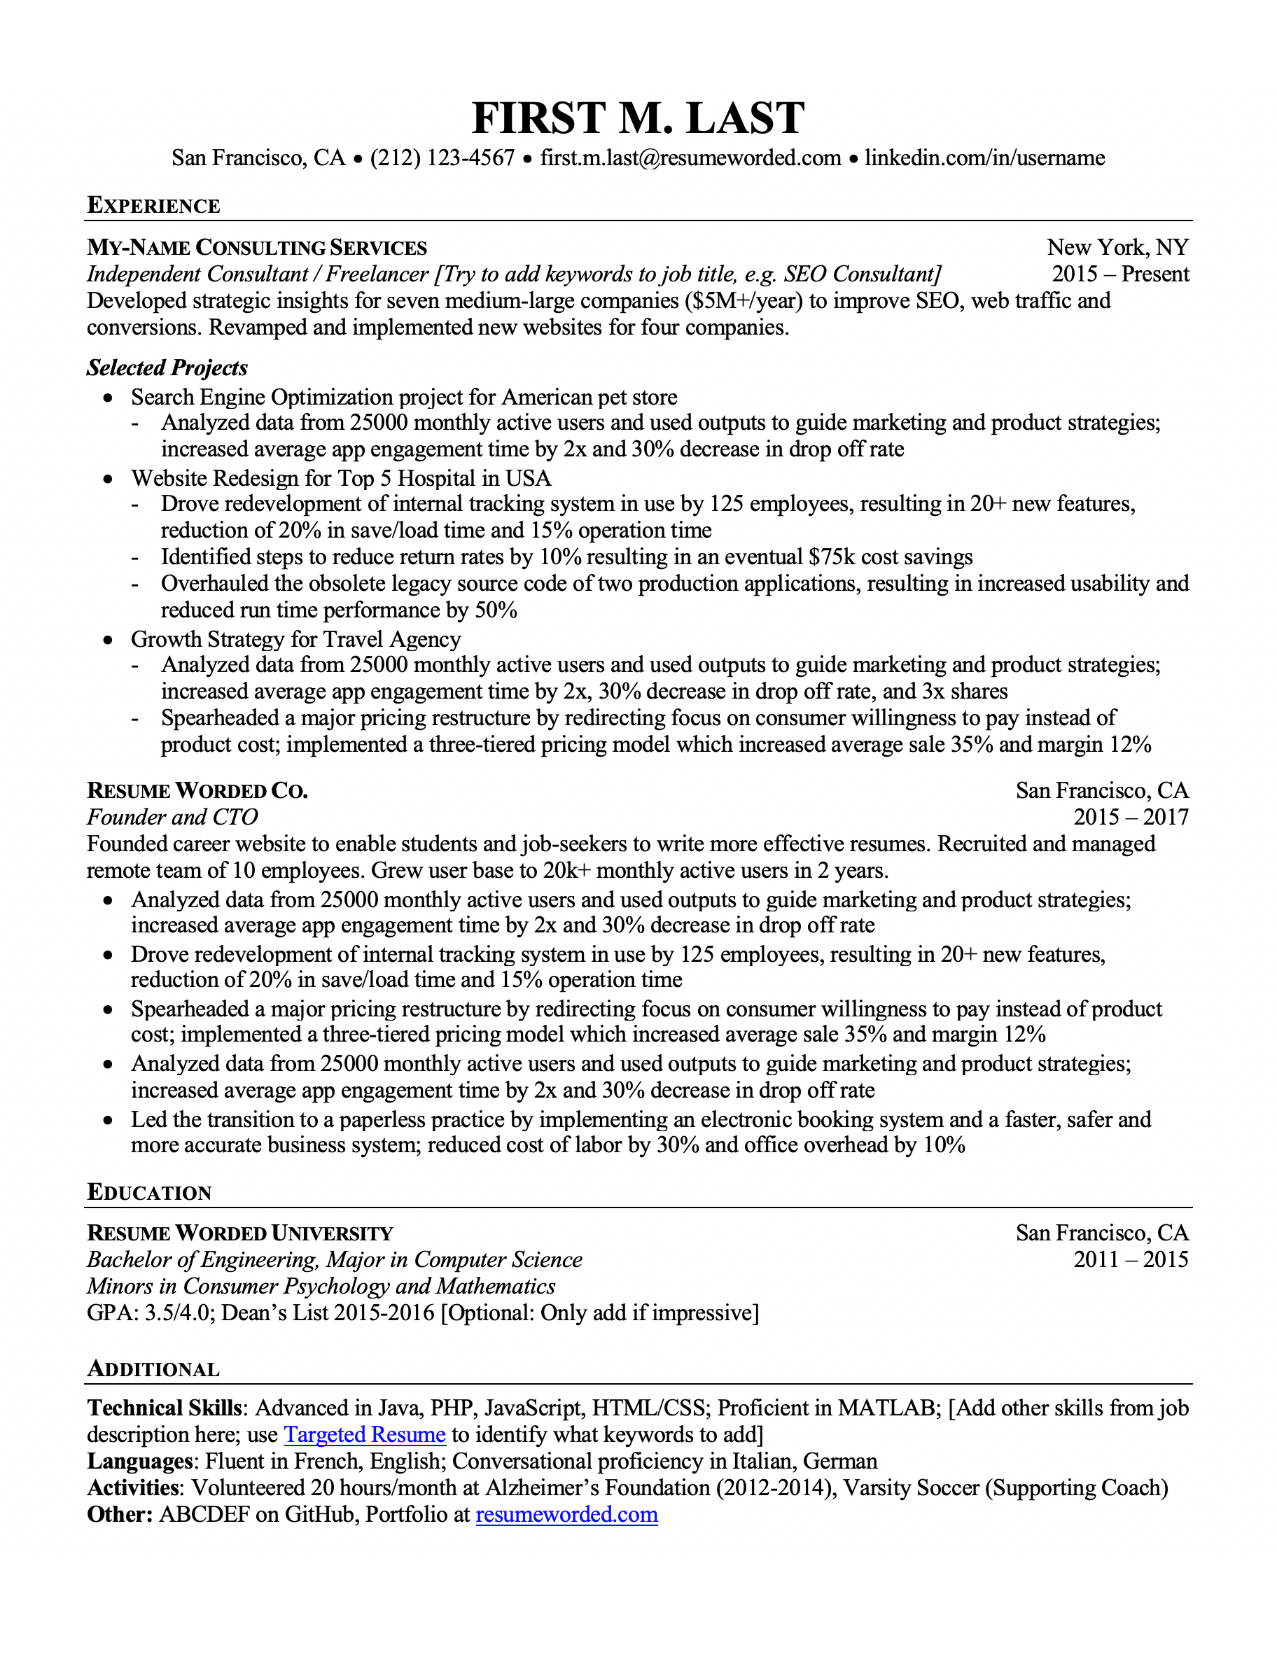 ATS Resume Templates, available in Word and Google Docs